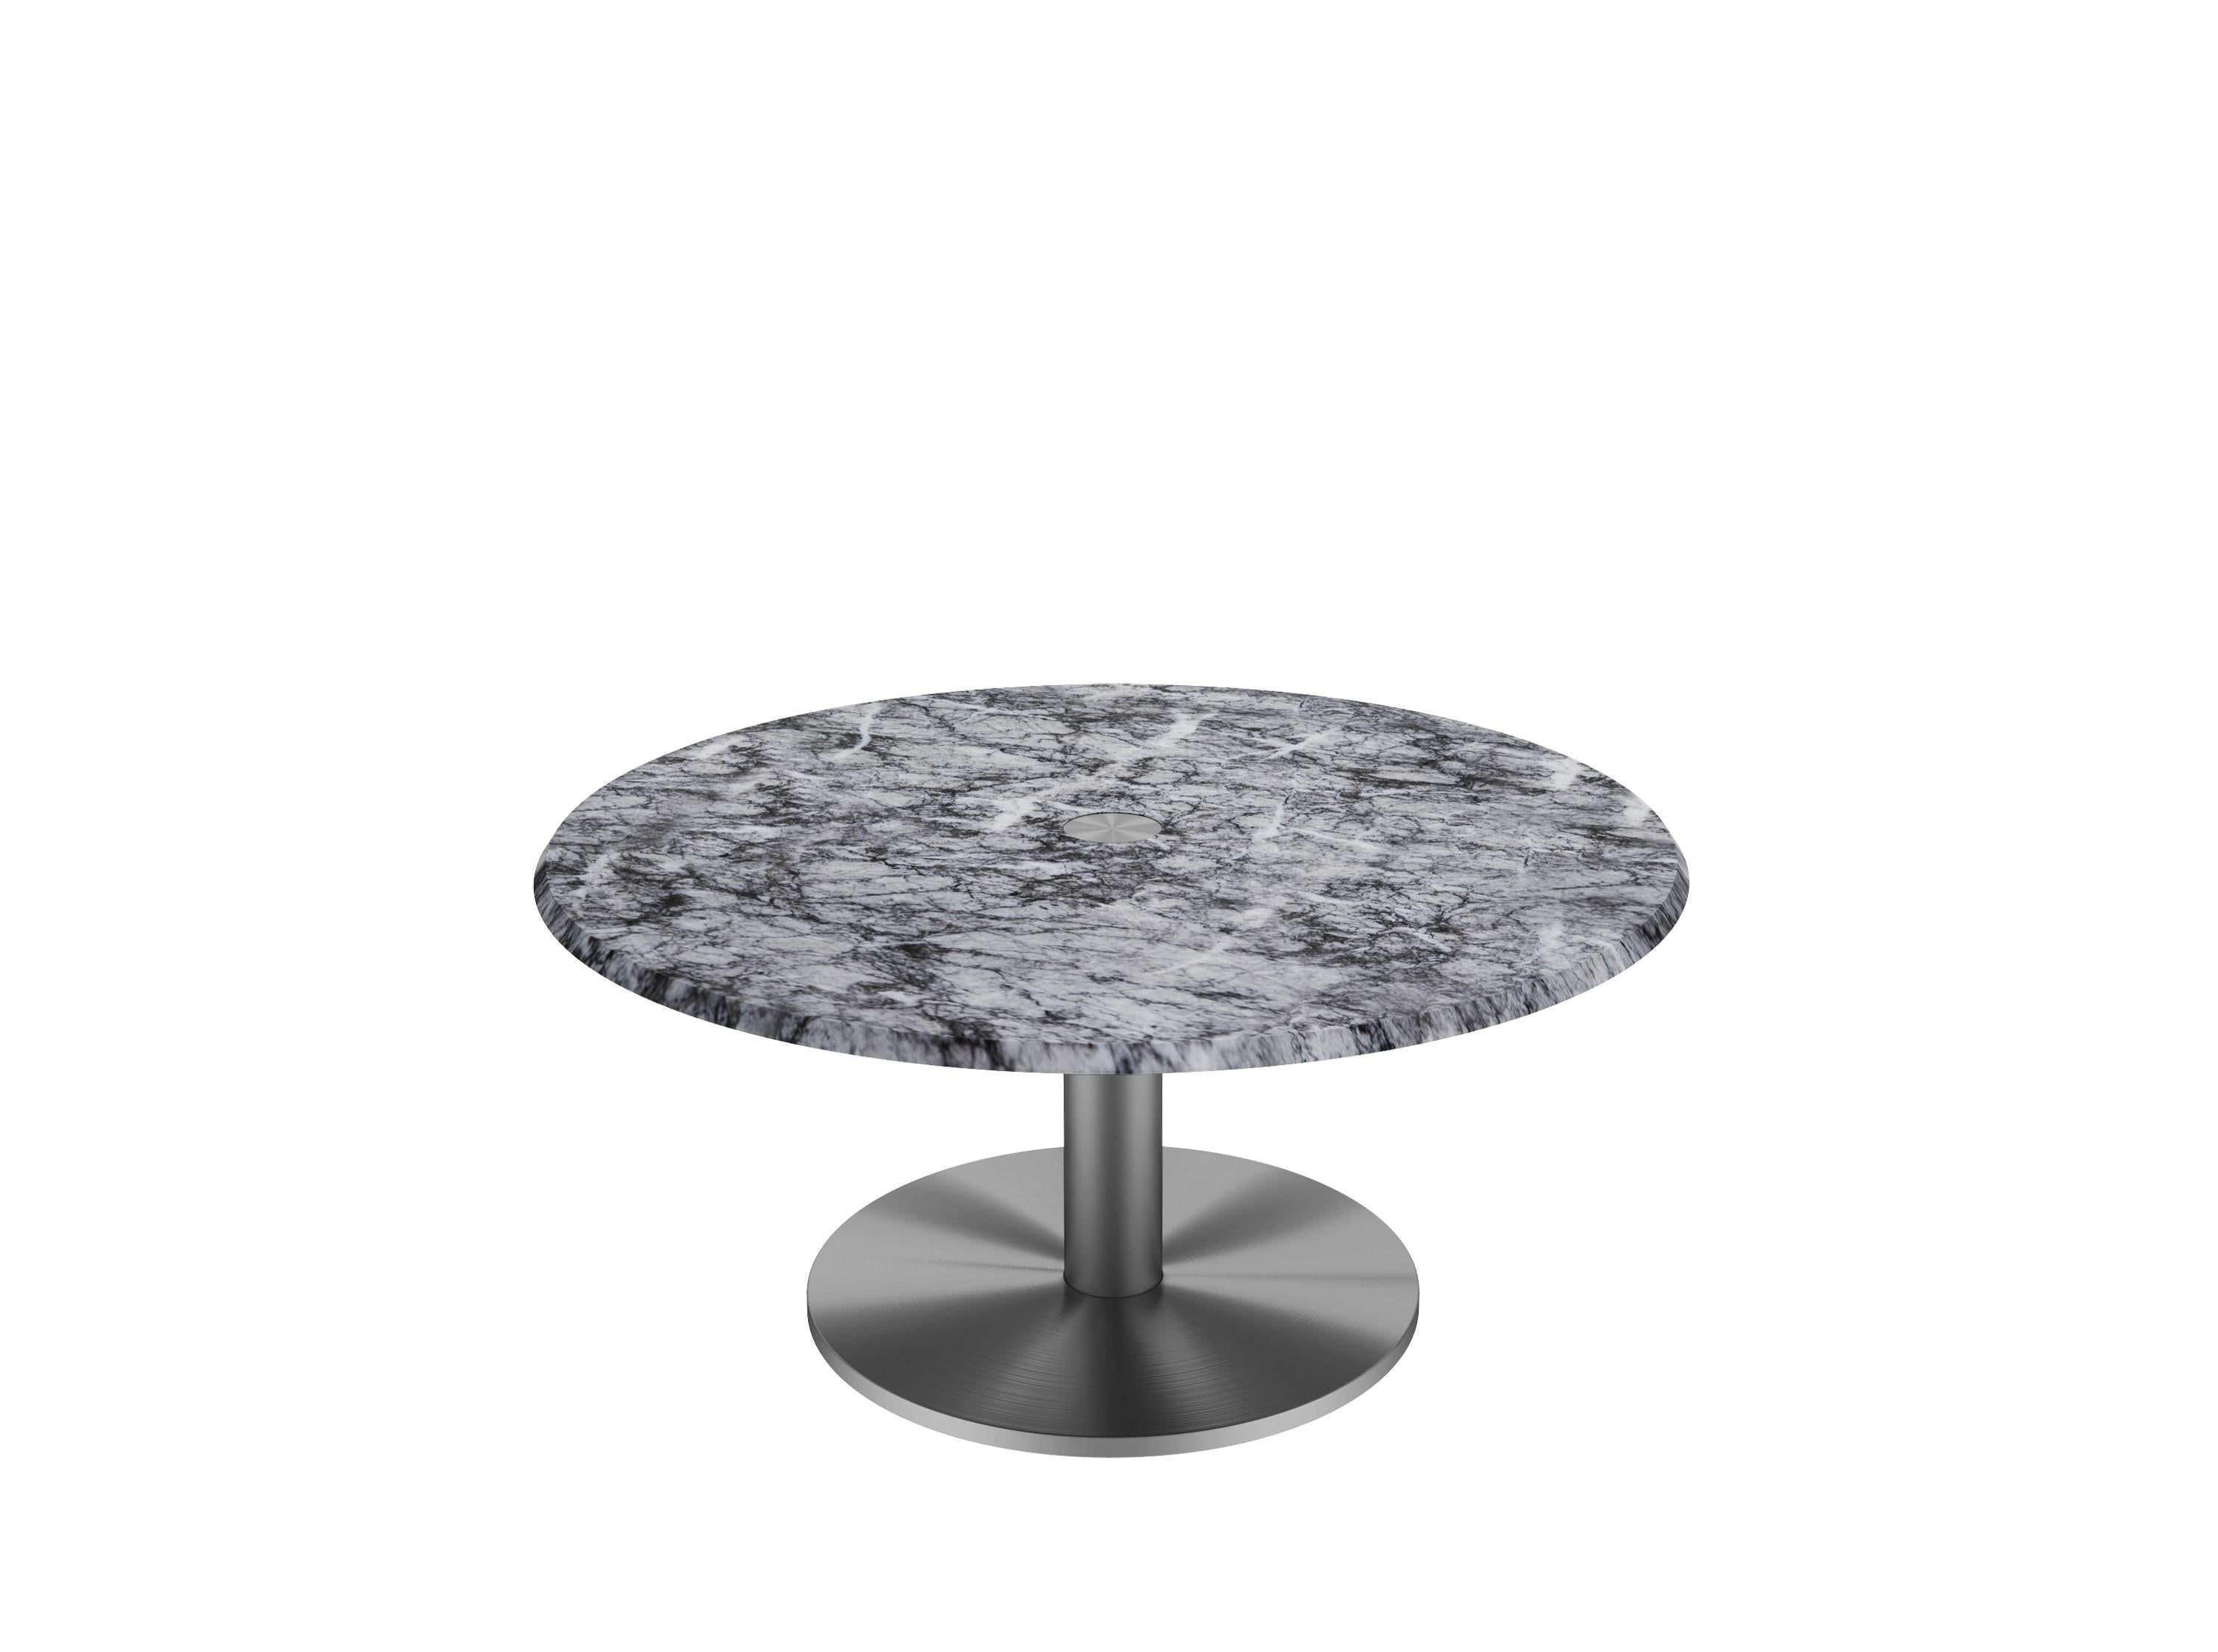 Chinese NORDST NOA Coffee Table, Italian White Mountain Marble, Danish Modern Design For Sale